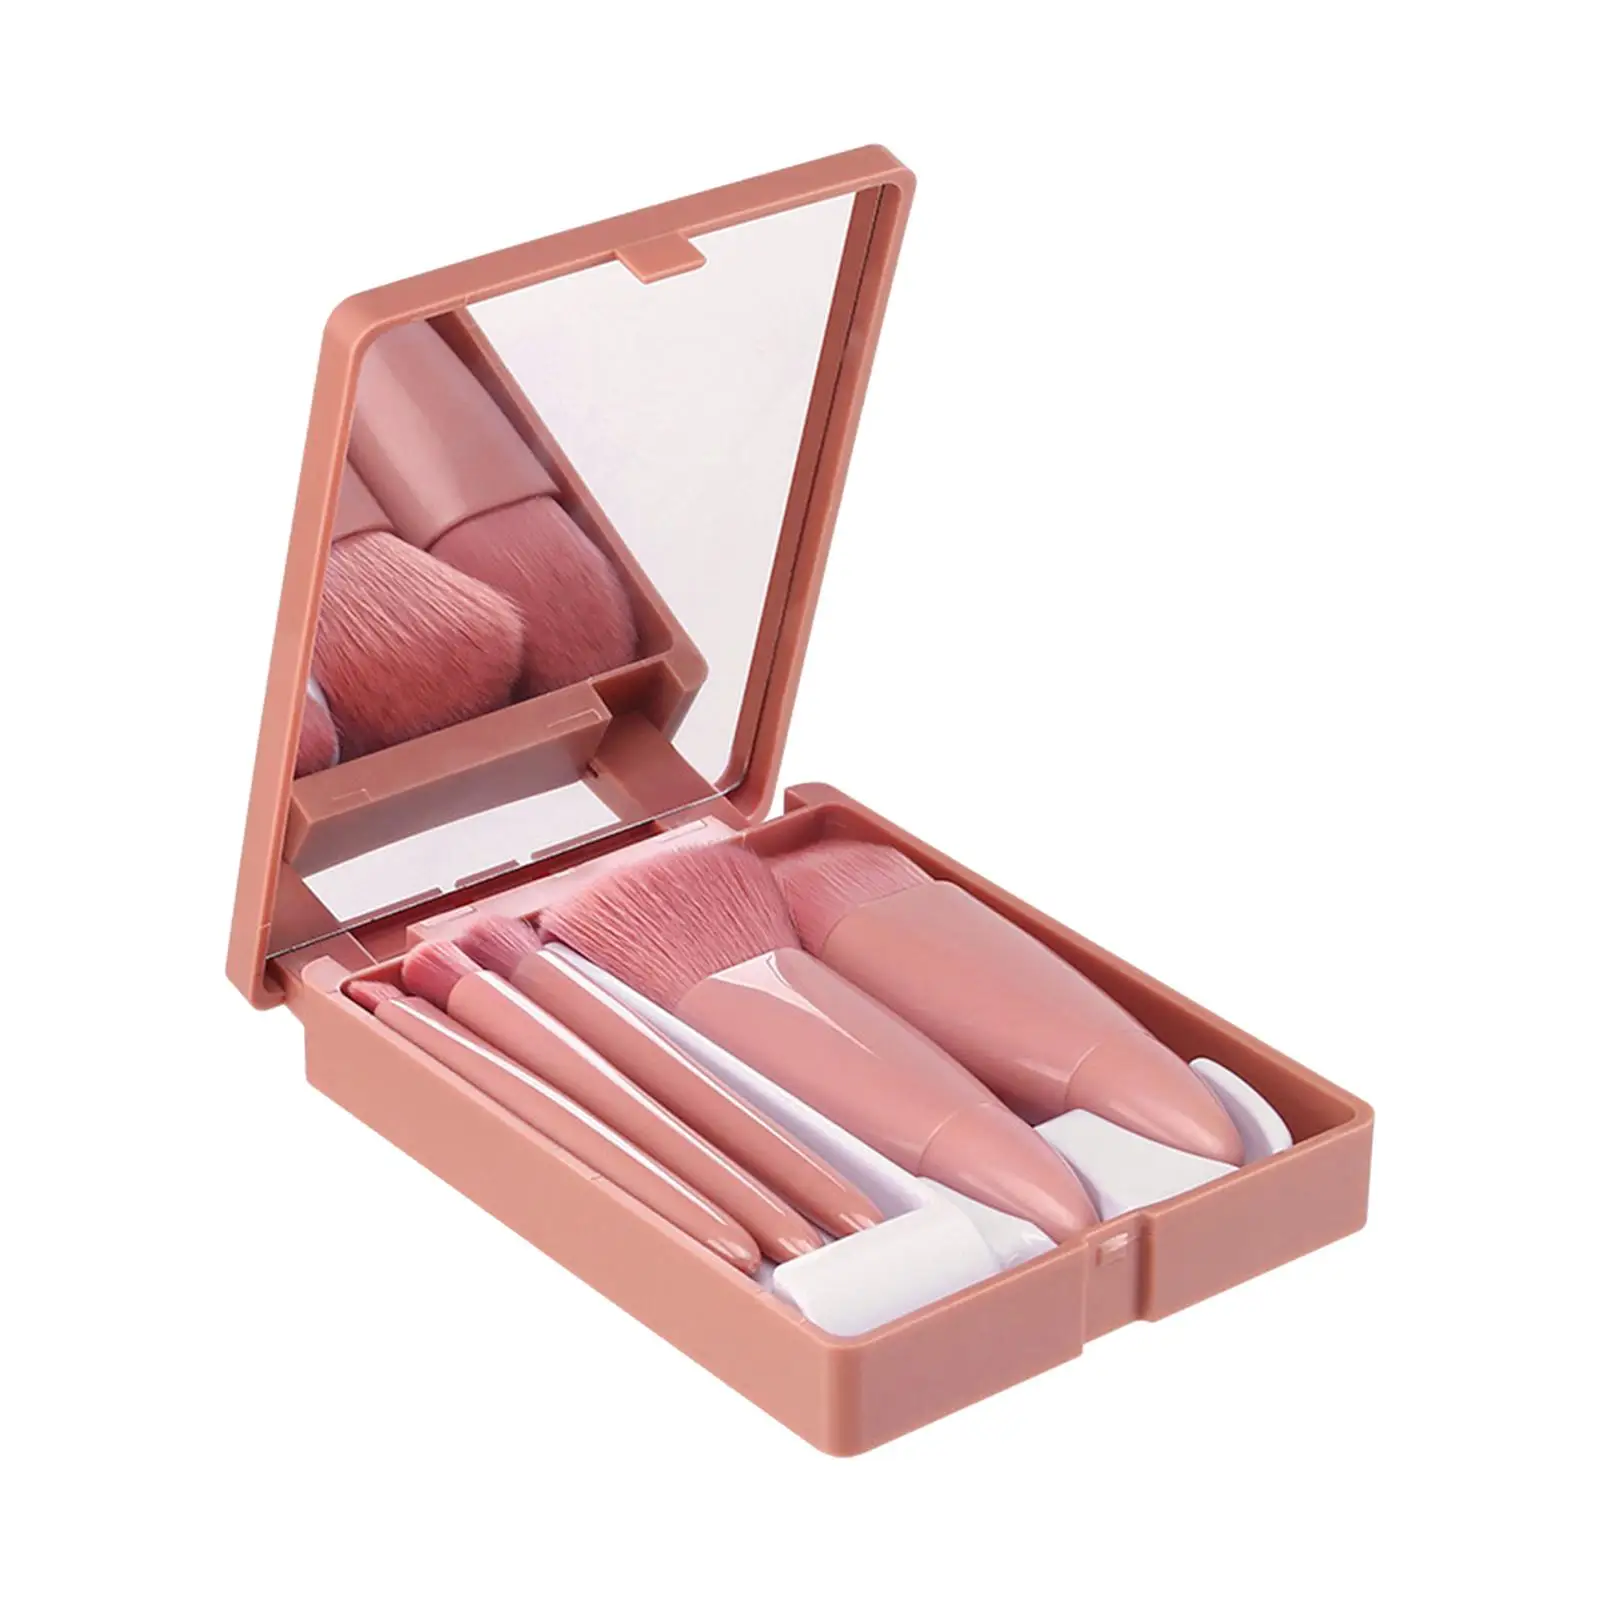 Makeup Brushes Set  Synthetic Powder Eyeshadow Eye Shadows Pink Highlight  with Case Blush Brushes for